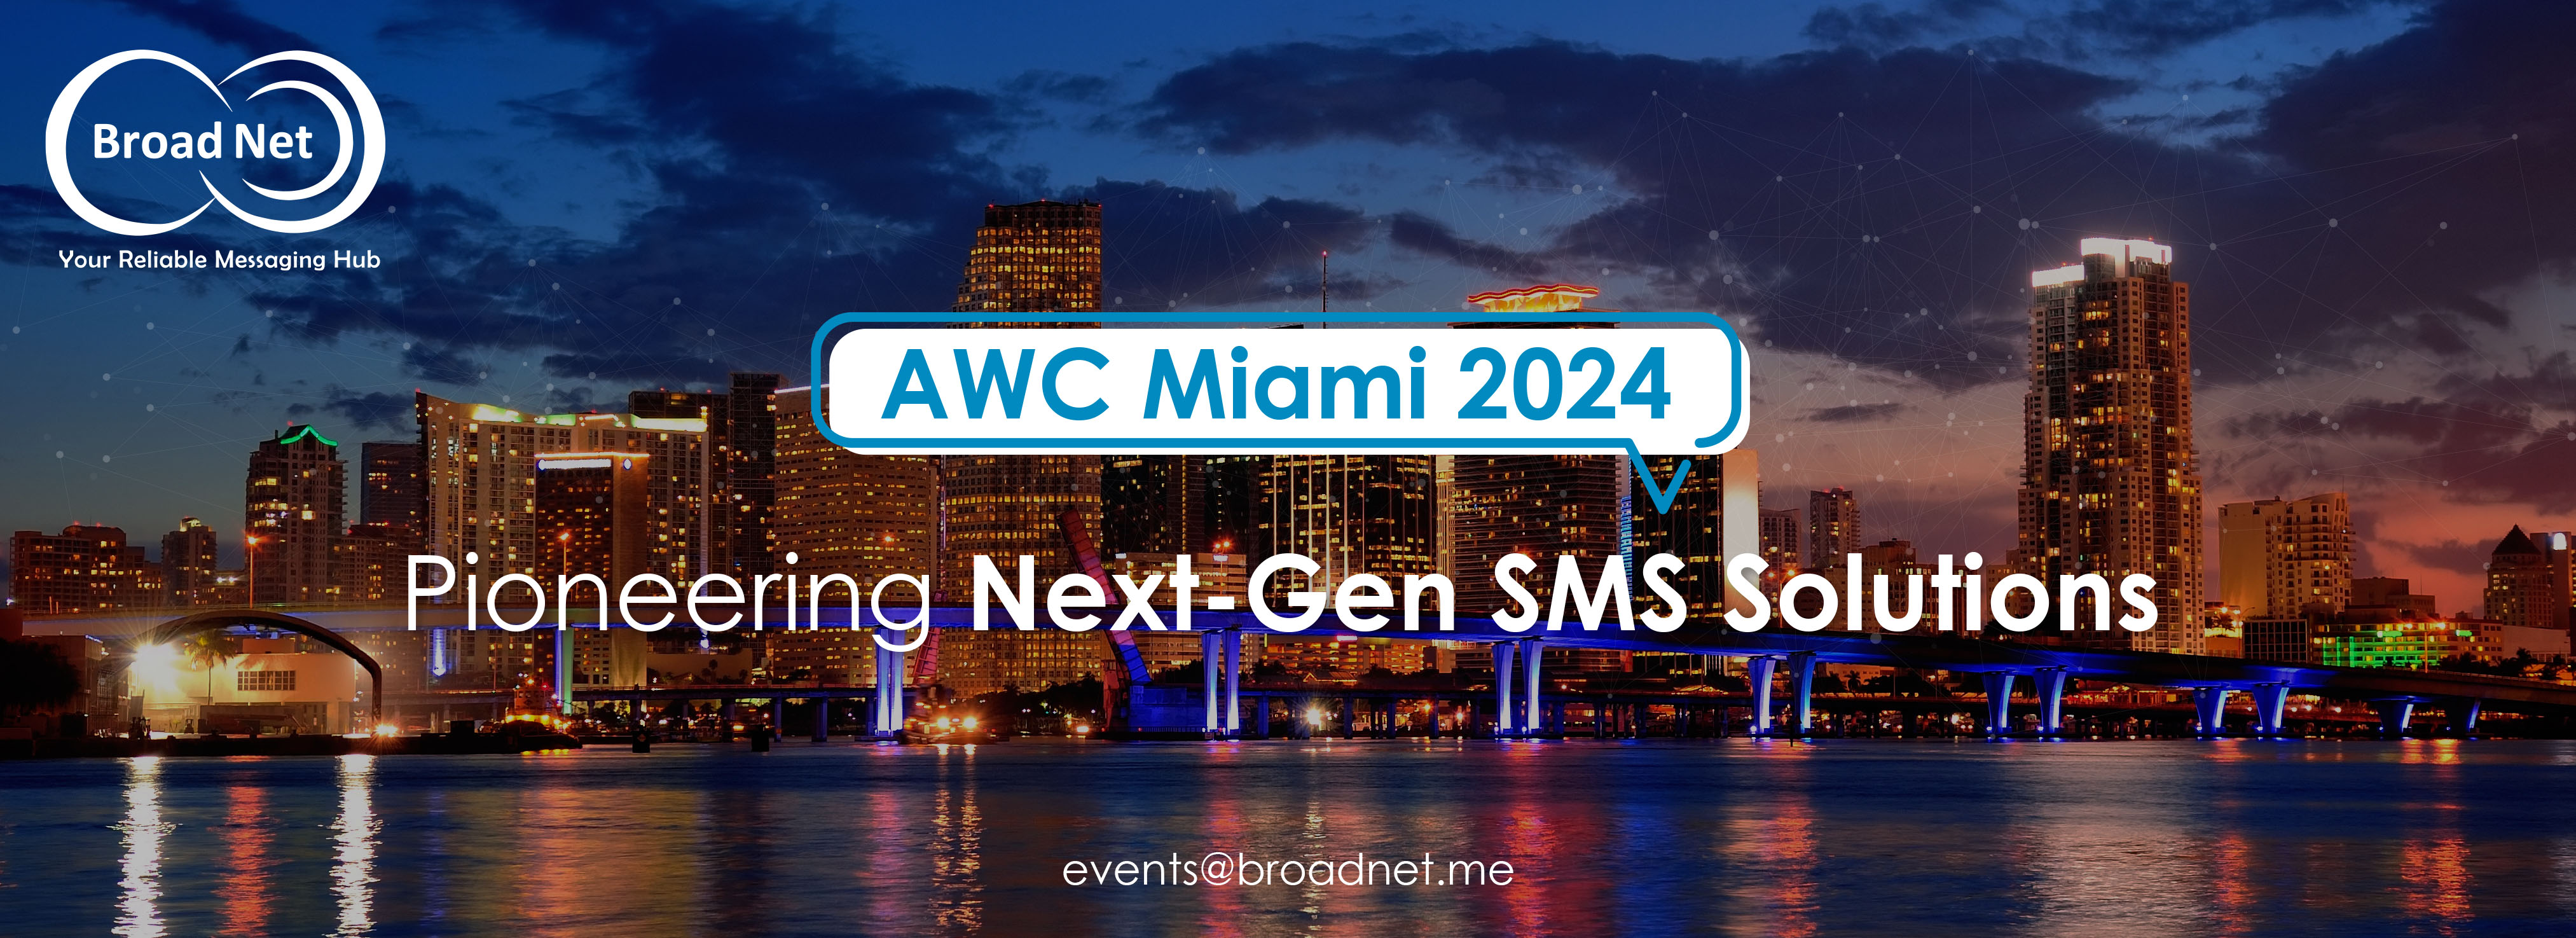 AWC Miami 2024: Pioneering Next-Gen SMS Solutions